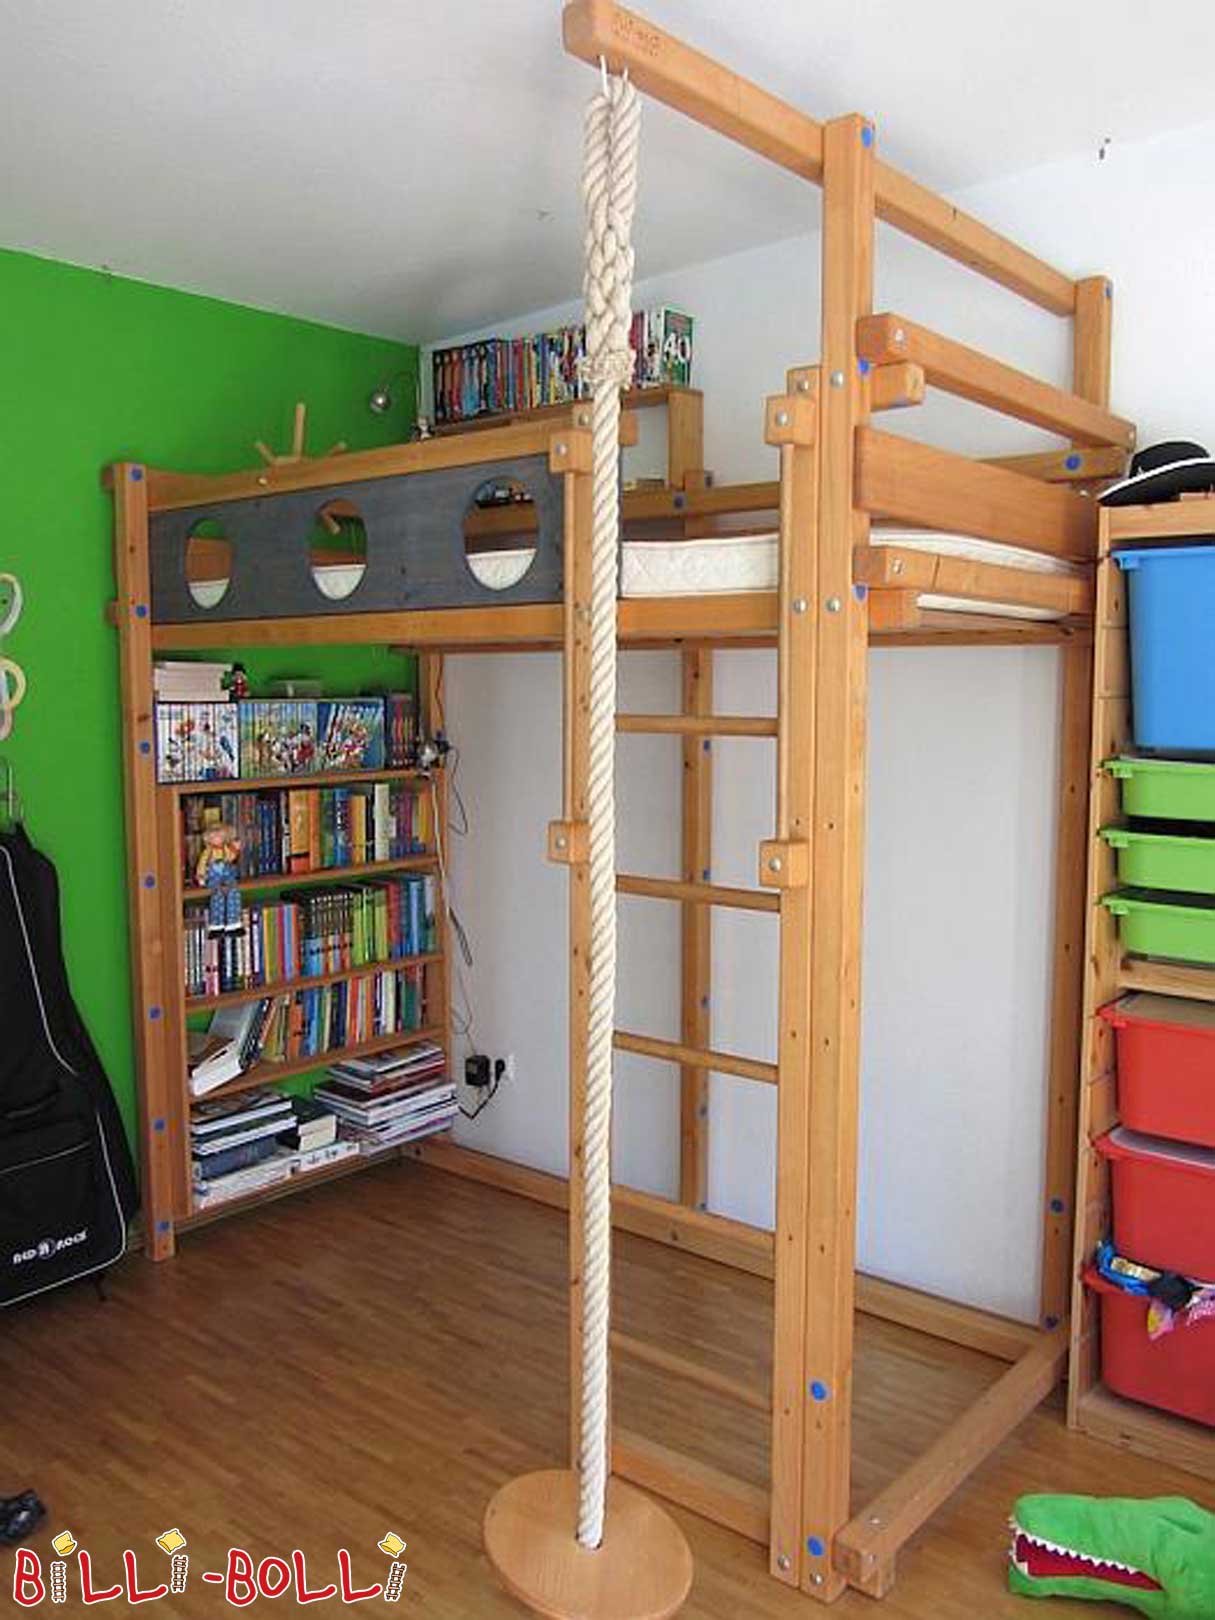 Billi Bolli loft bed growing with you (Category: second hand loft bed)